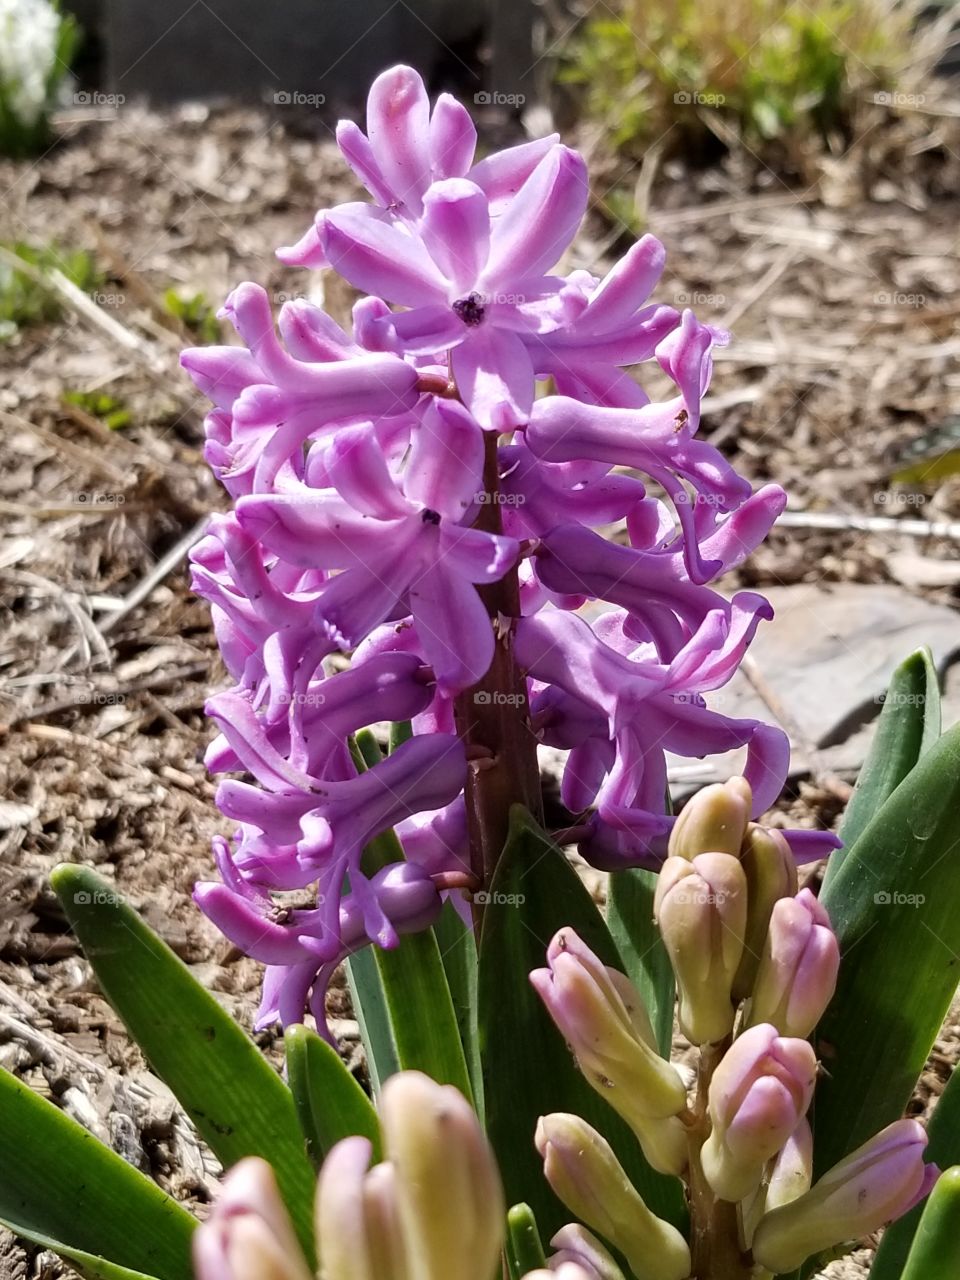 people hyacinths finally blooming! smells amazing